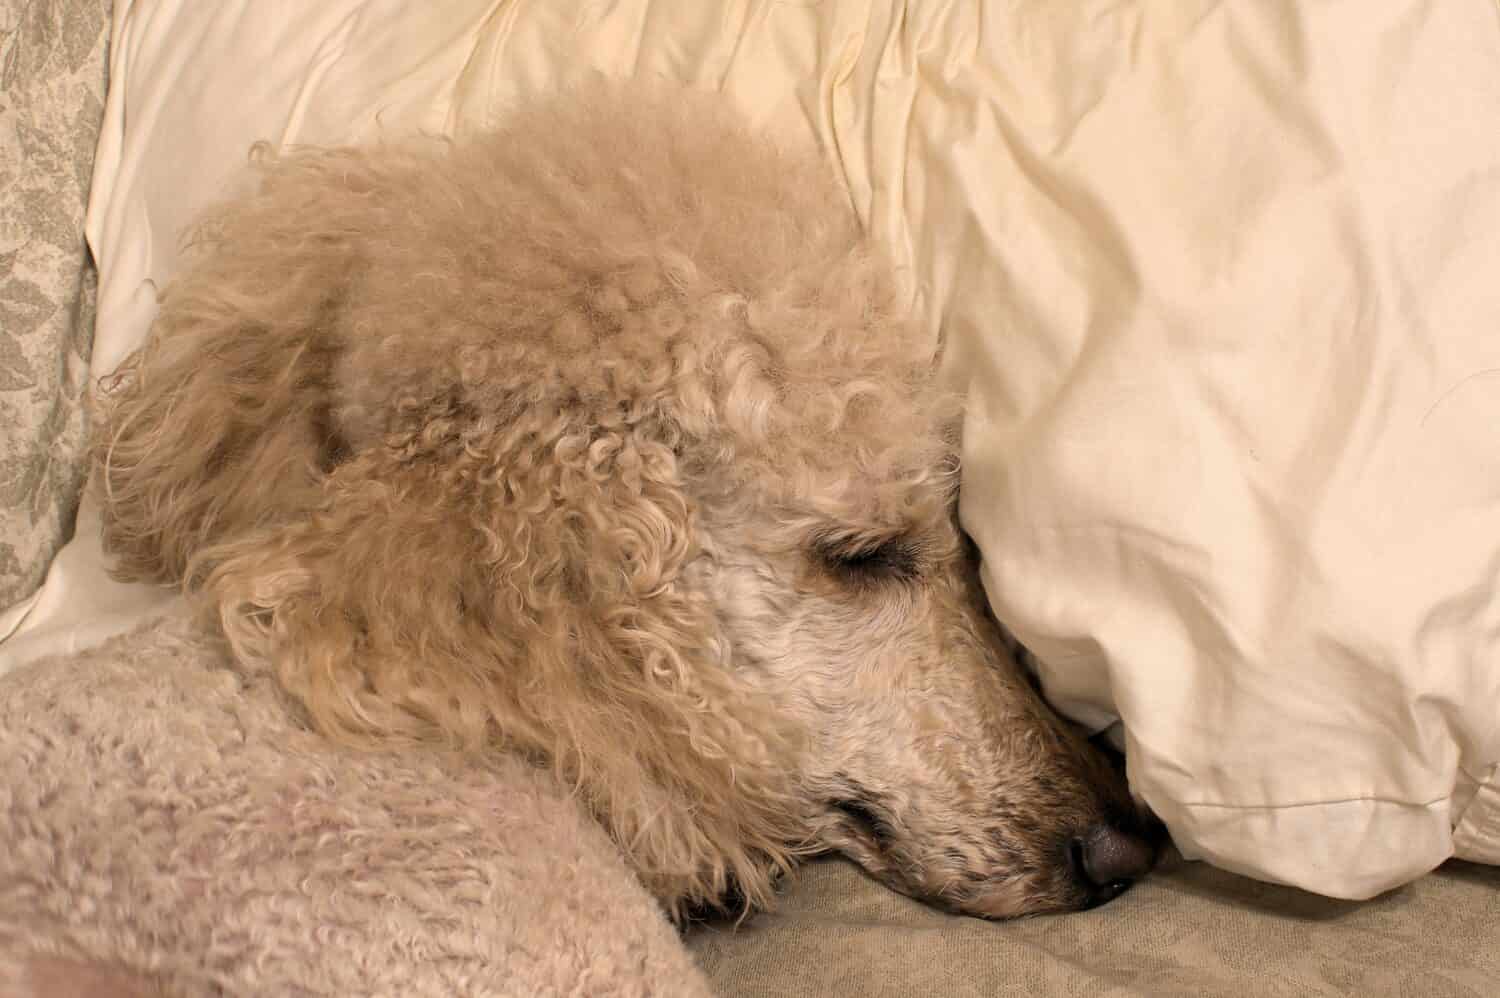 Standard Poodle sleeping with its head on a white pillow.